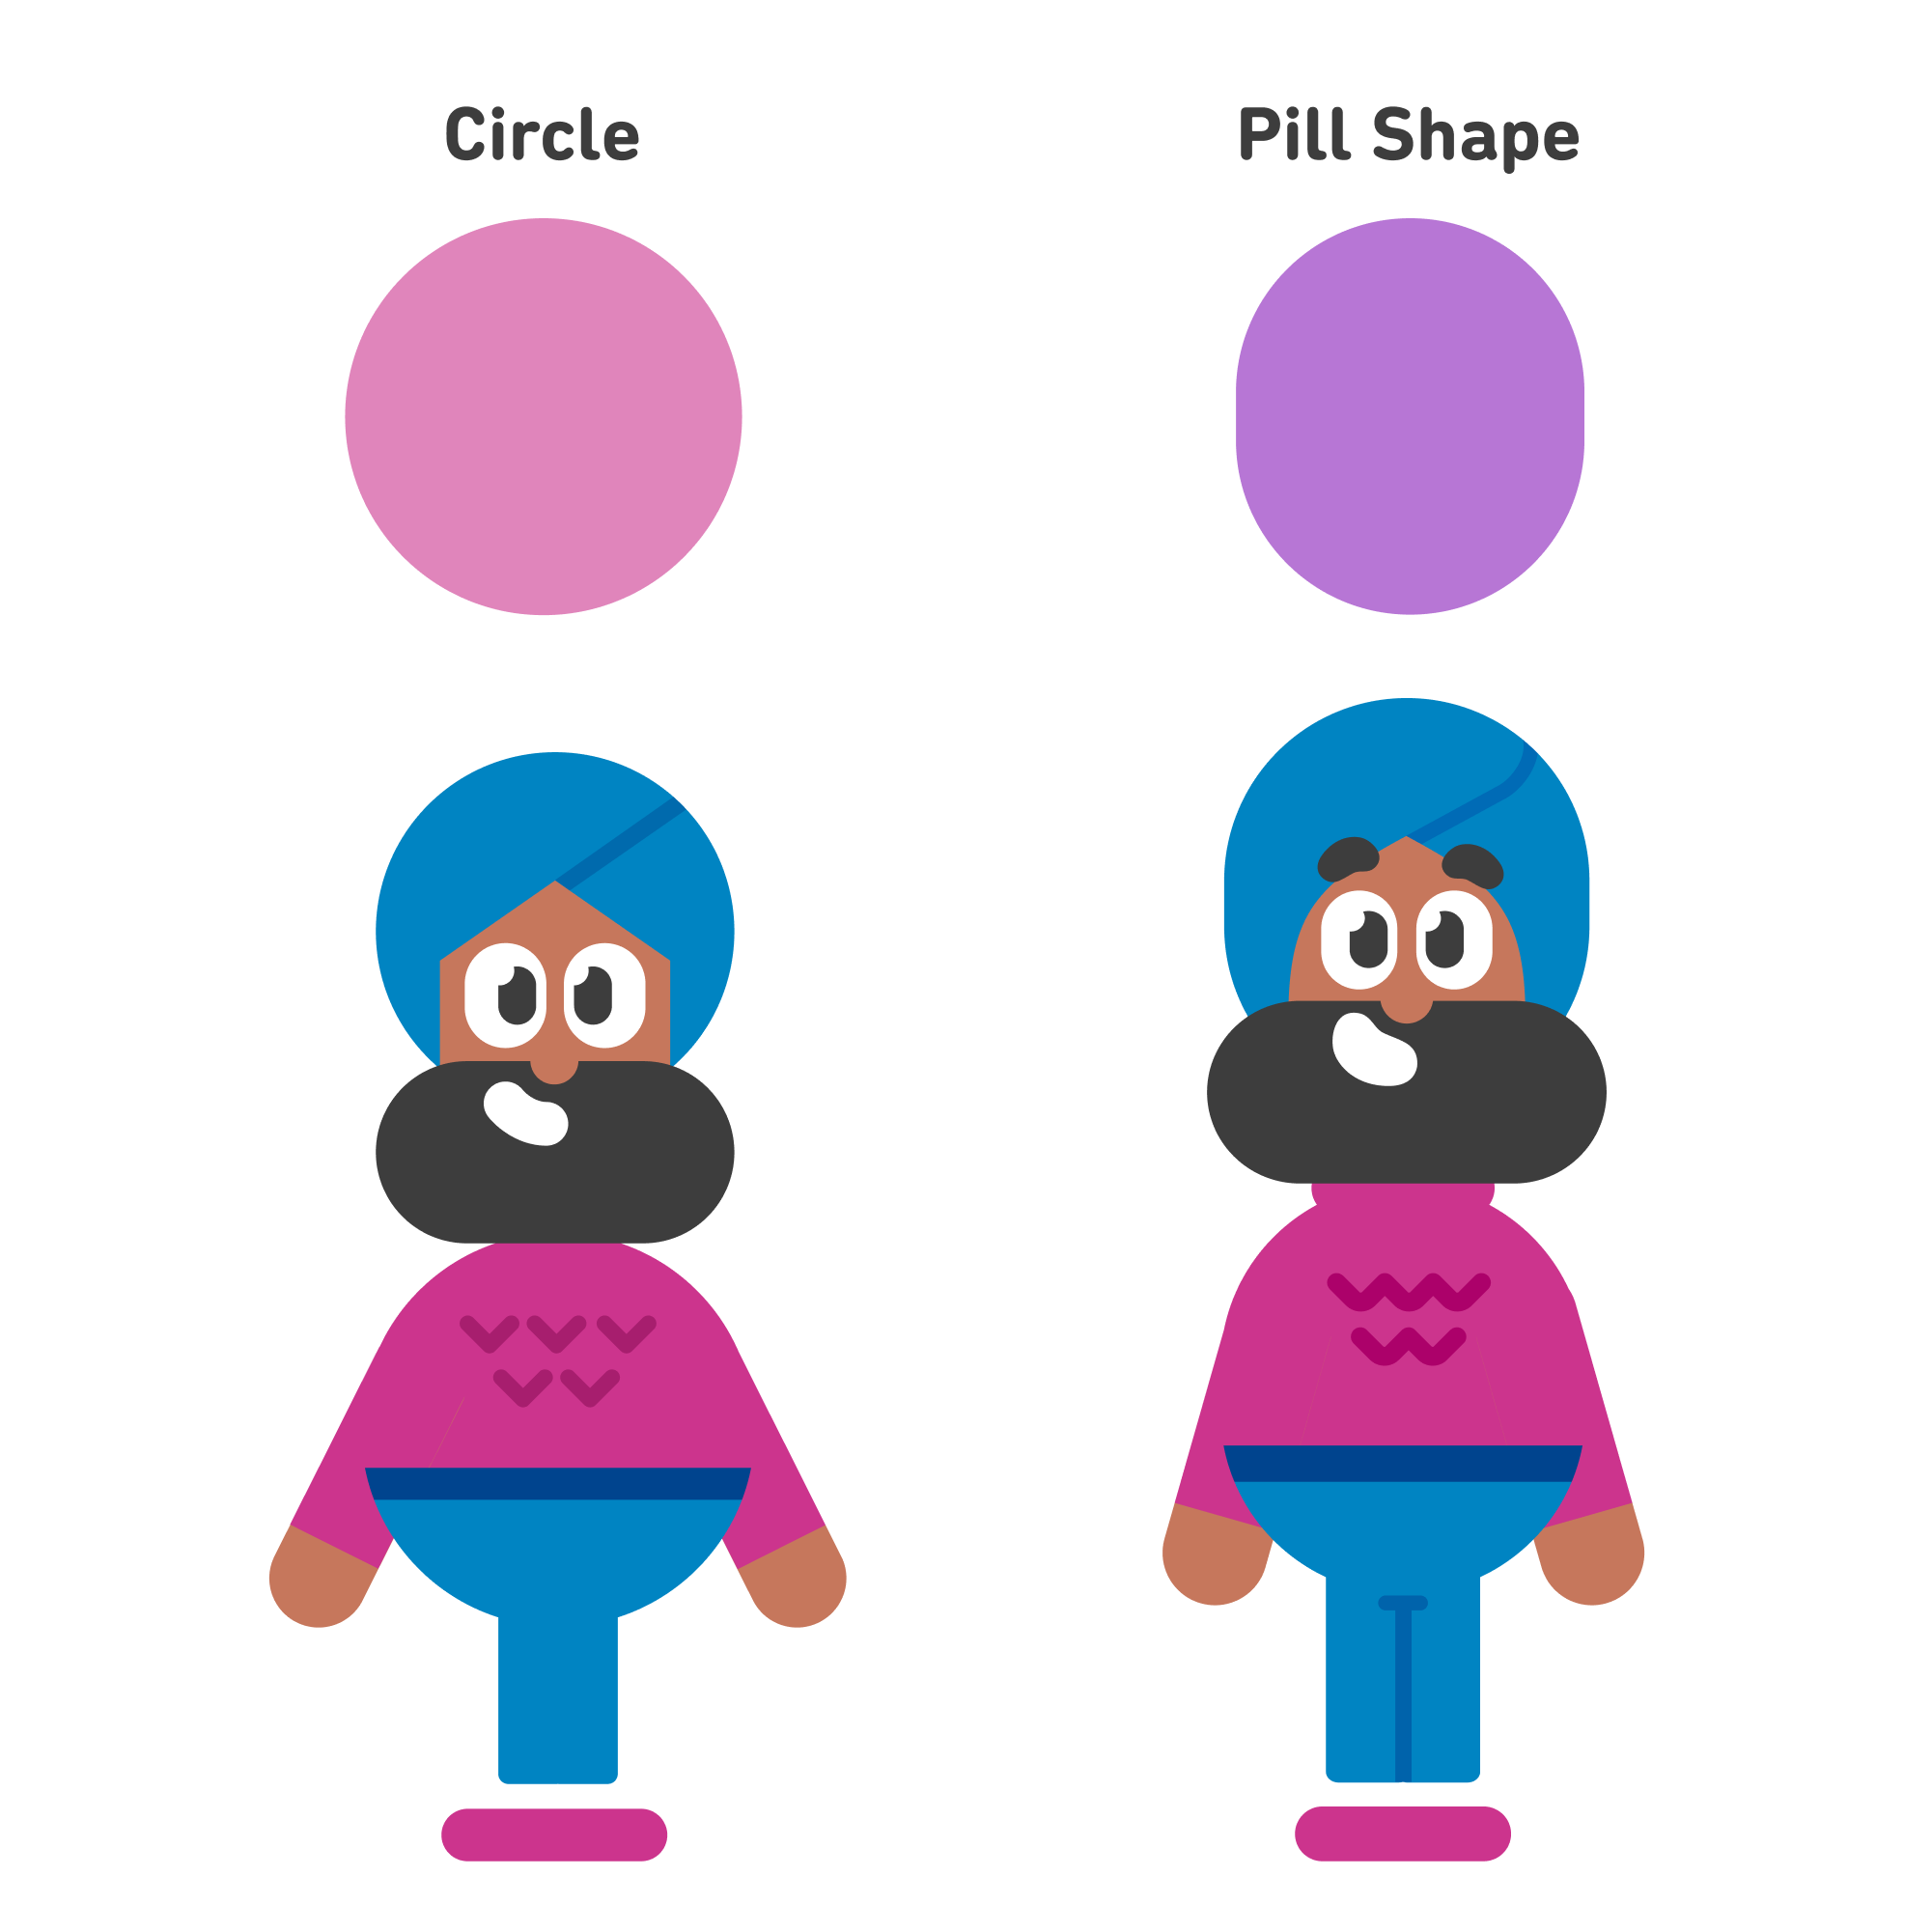 Comparing Vikram old design, with the shape of circle, vs Vikram new design, which is based on pill shape with straight edges while keeping the round edges on top and bottom.